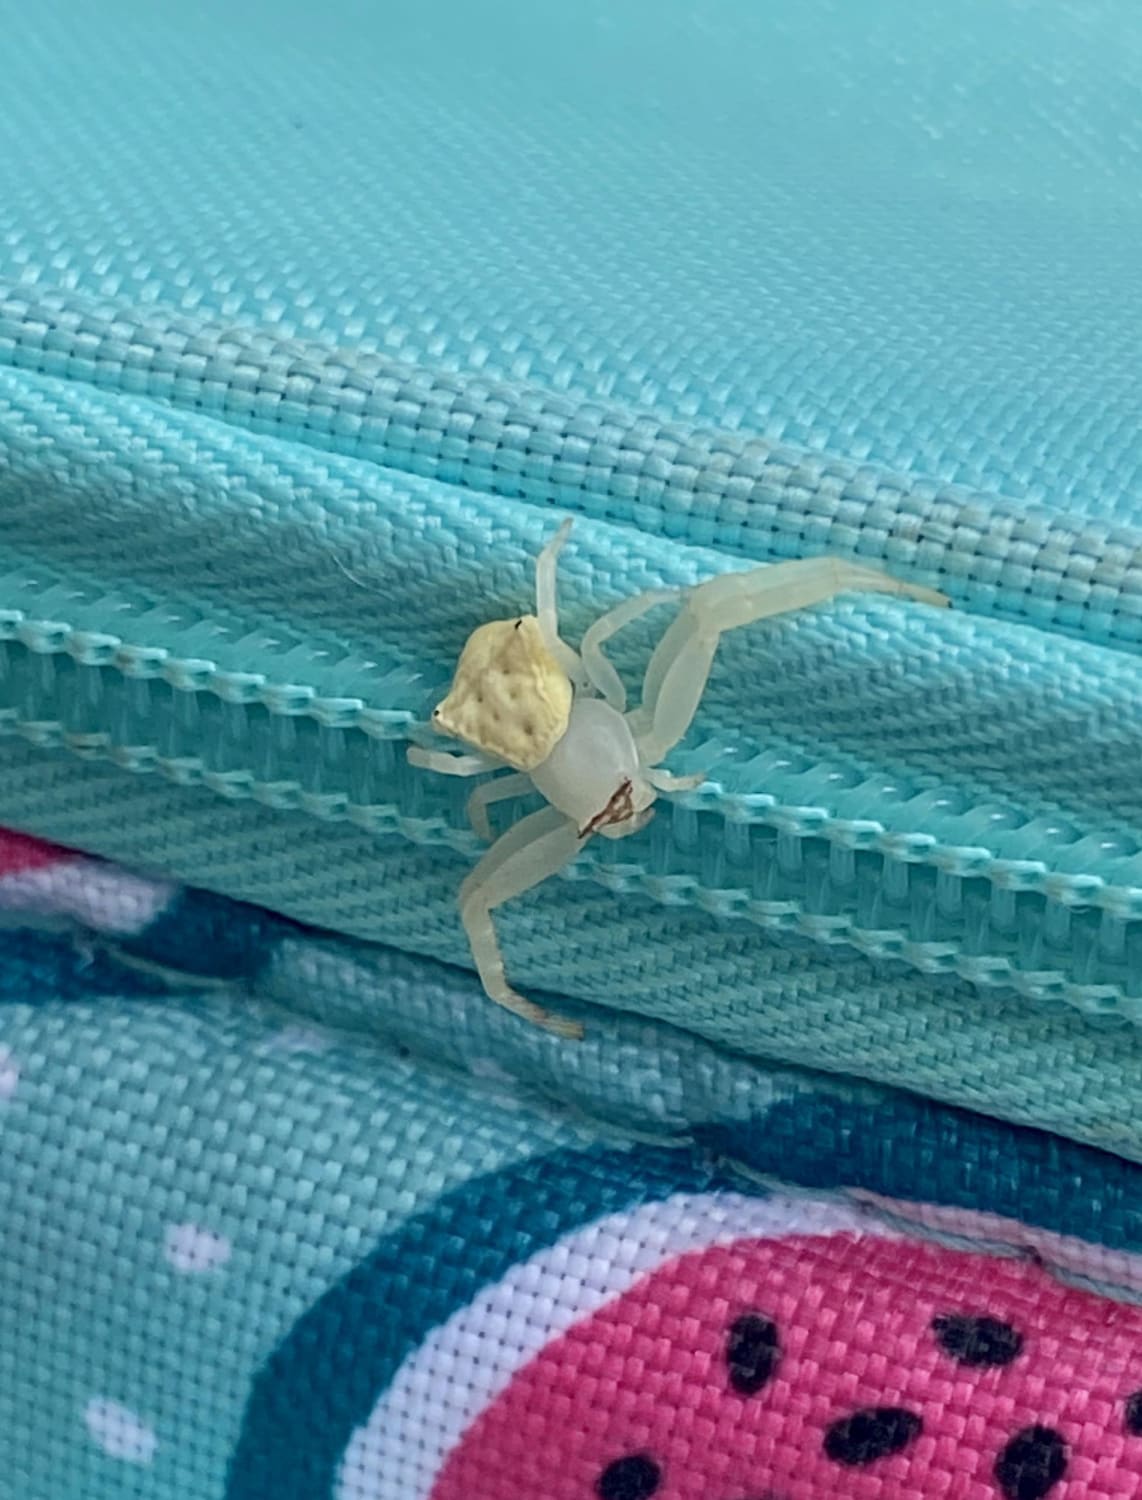 Who’s this Saltine Cracker spider? I’m located in Tokyo Japan and went to the park for a picnic and found this little guy crawling all over my basket. Couldn’t help but laugh. It also kinda walks like a crab.